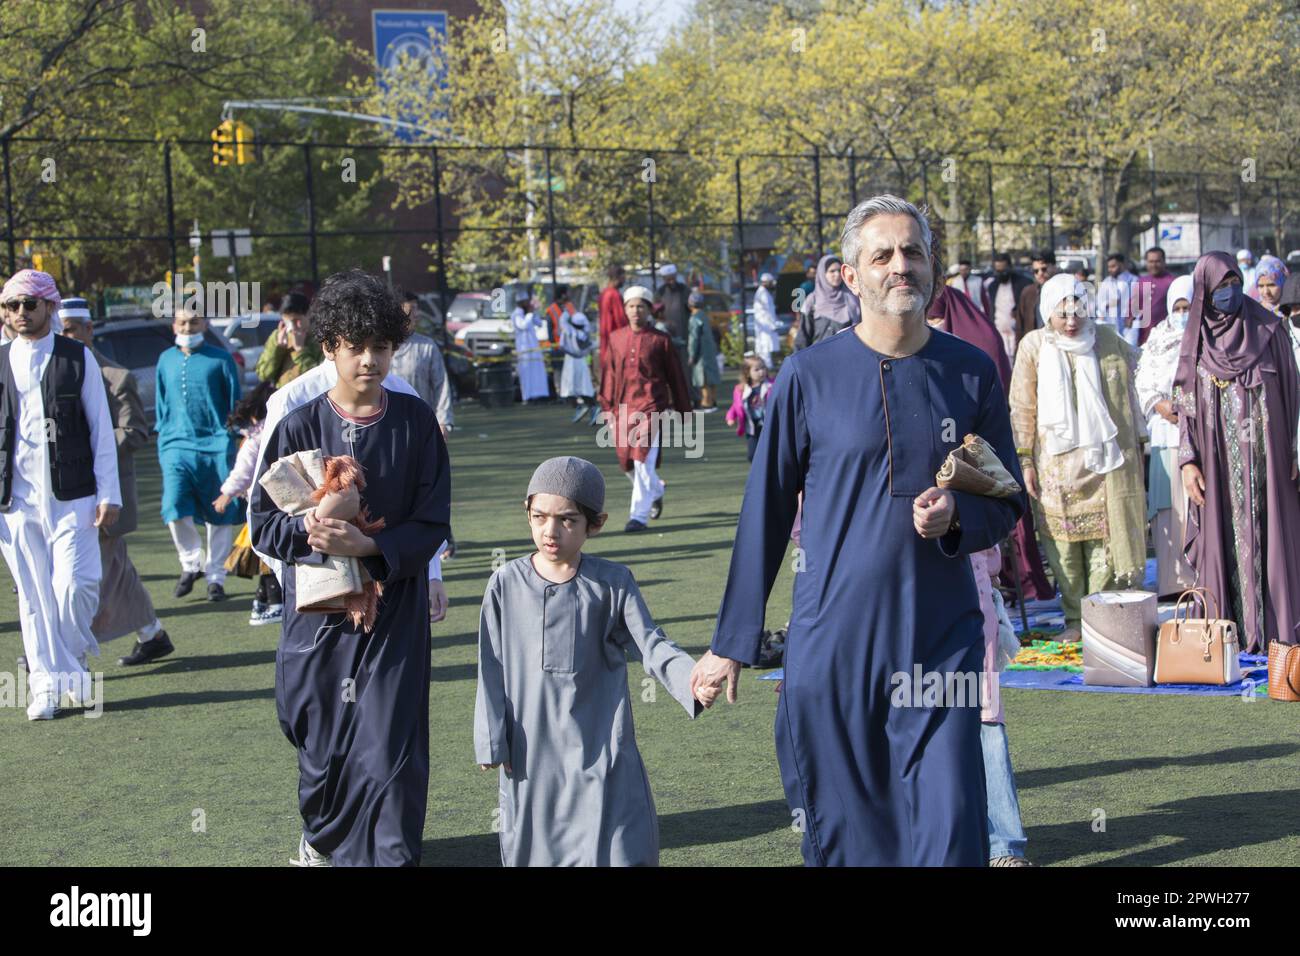 Muslims from various mosques in Brooklyn attend a prayer service on Eid at the end of Ramadan in Prospect Park, Brooklyn, New York. Stock Photo